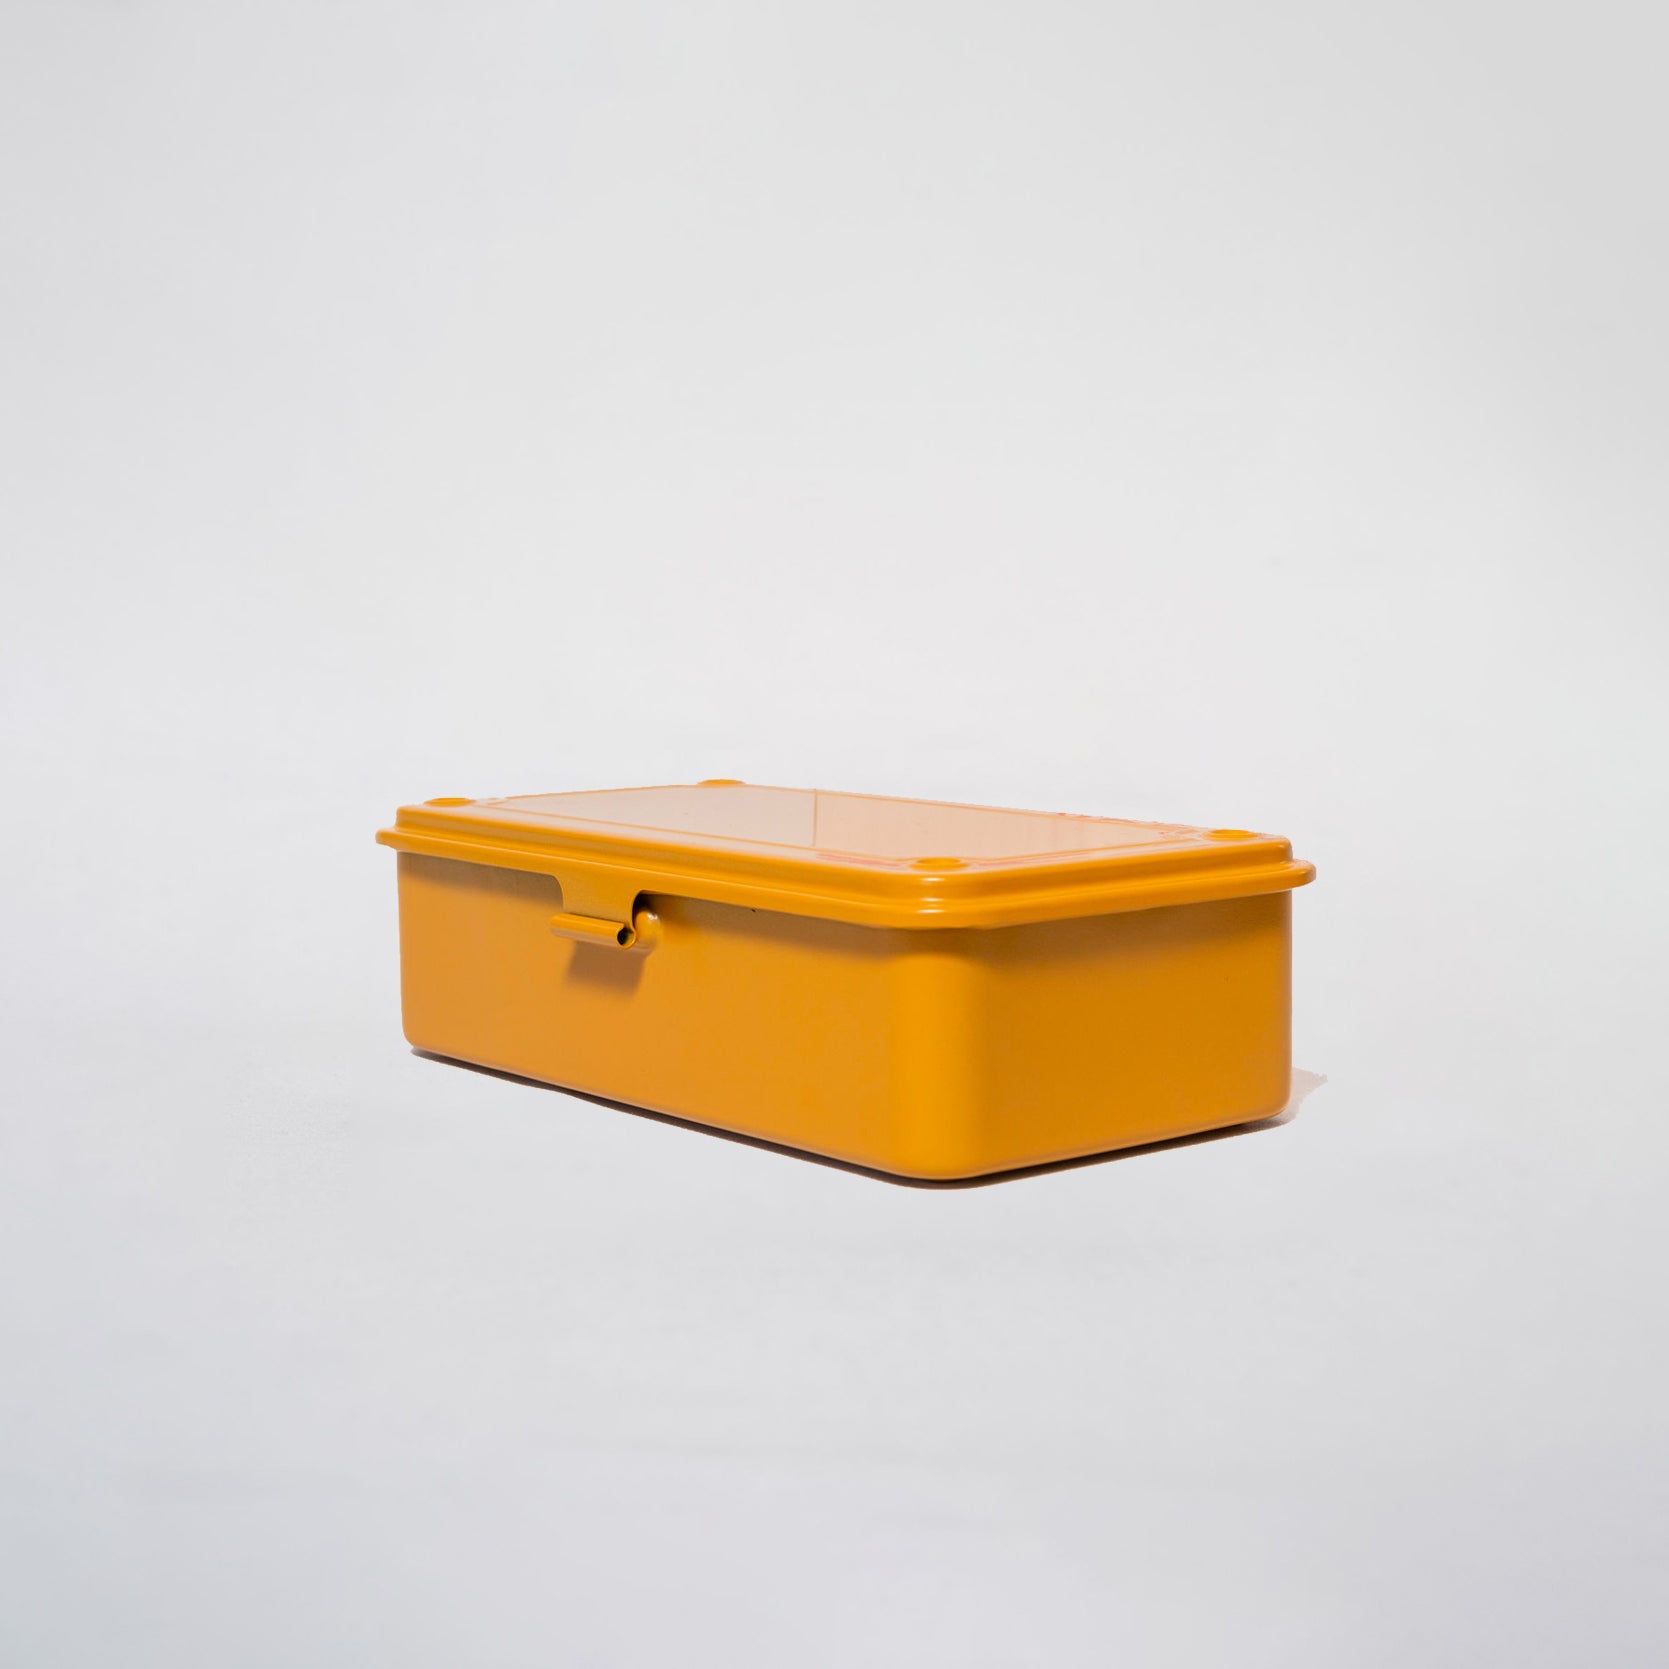 TOYO STEEL | Toolboxes made in Japan since 1969 | The Outsiders 